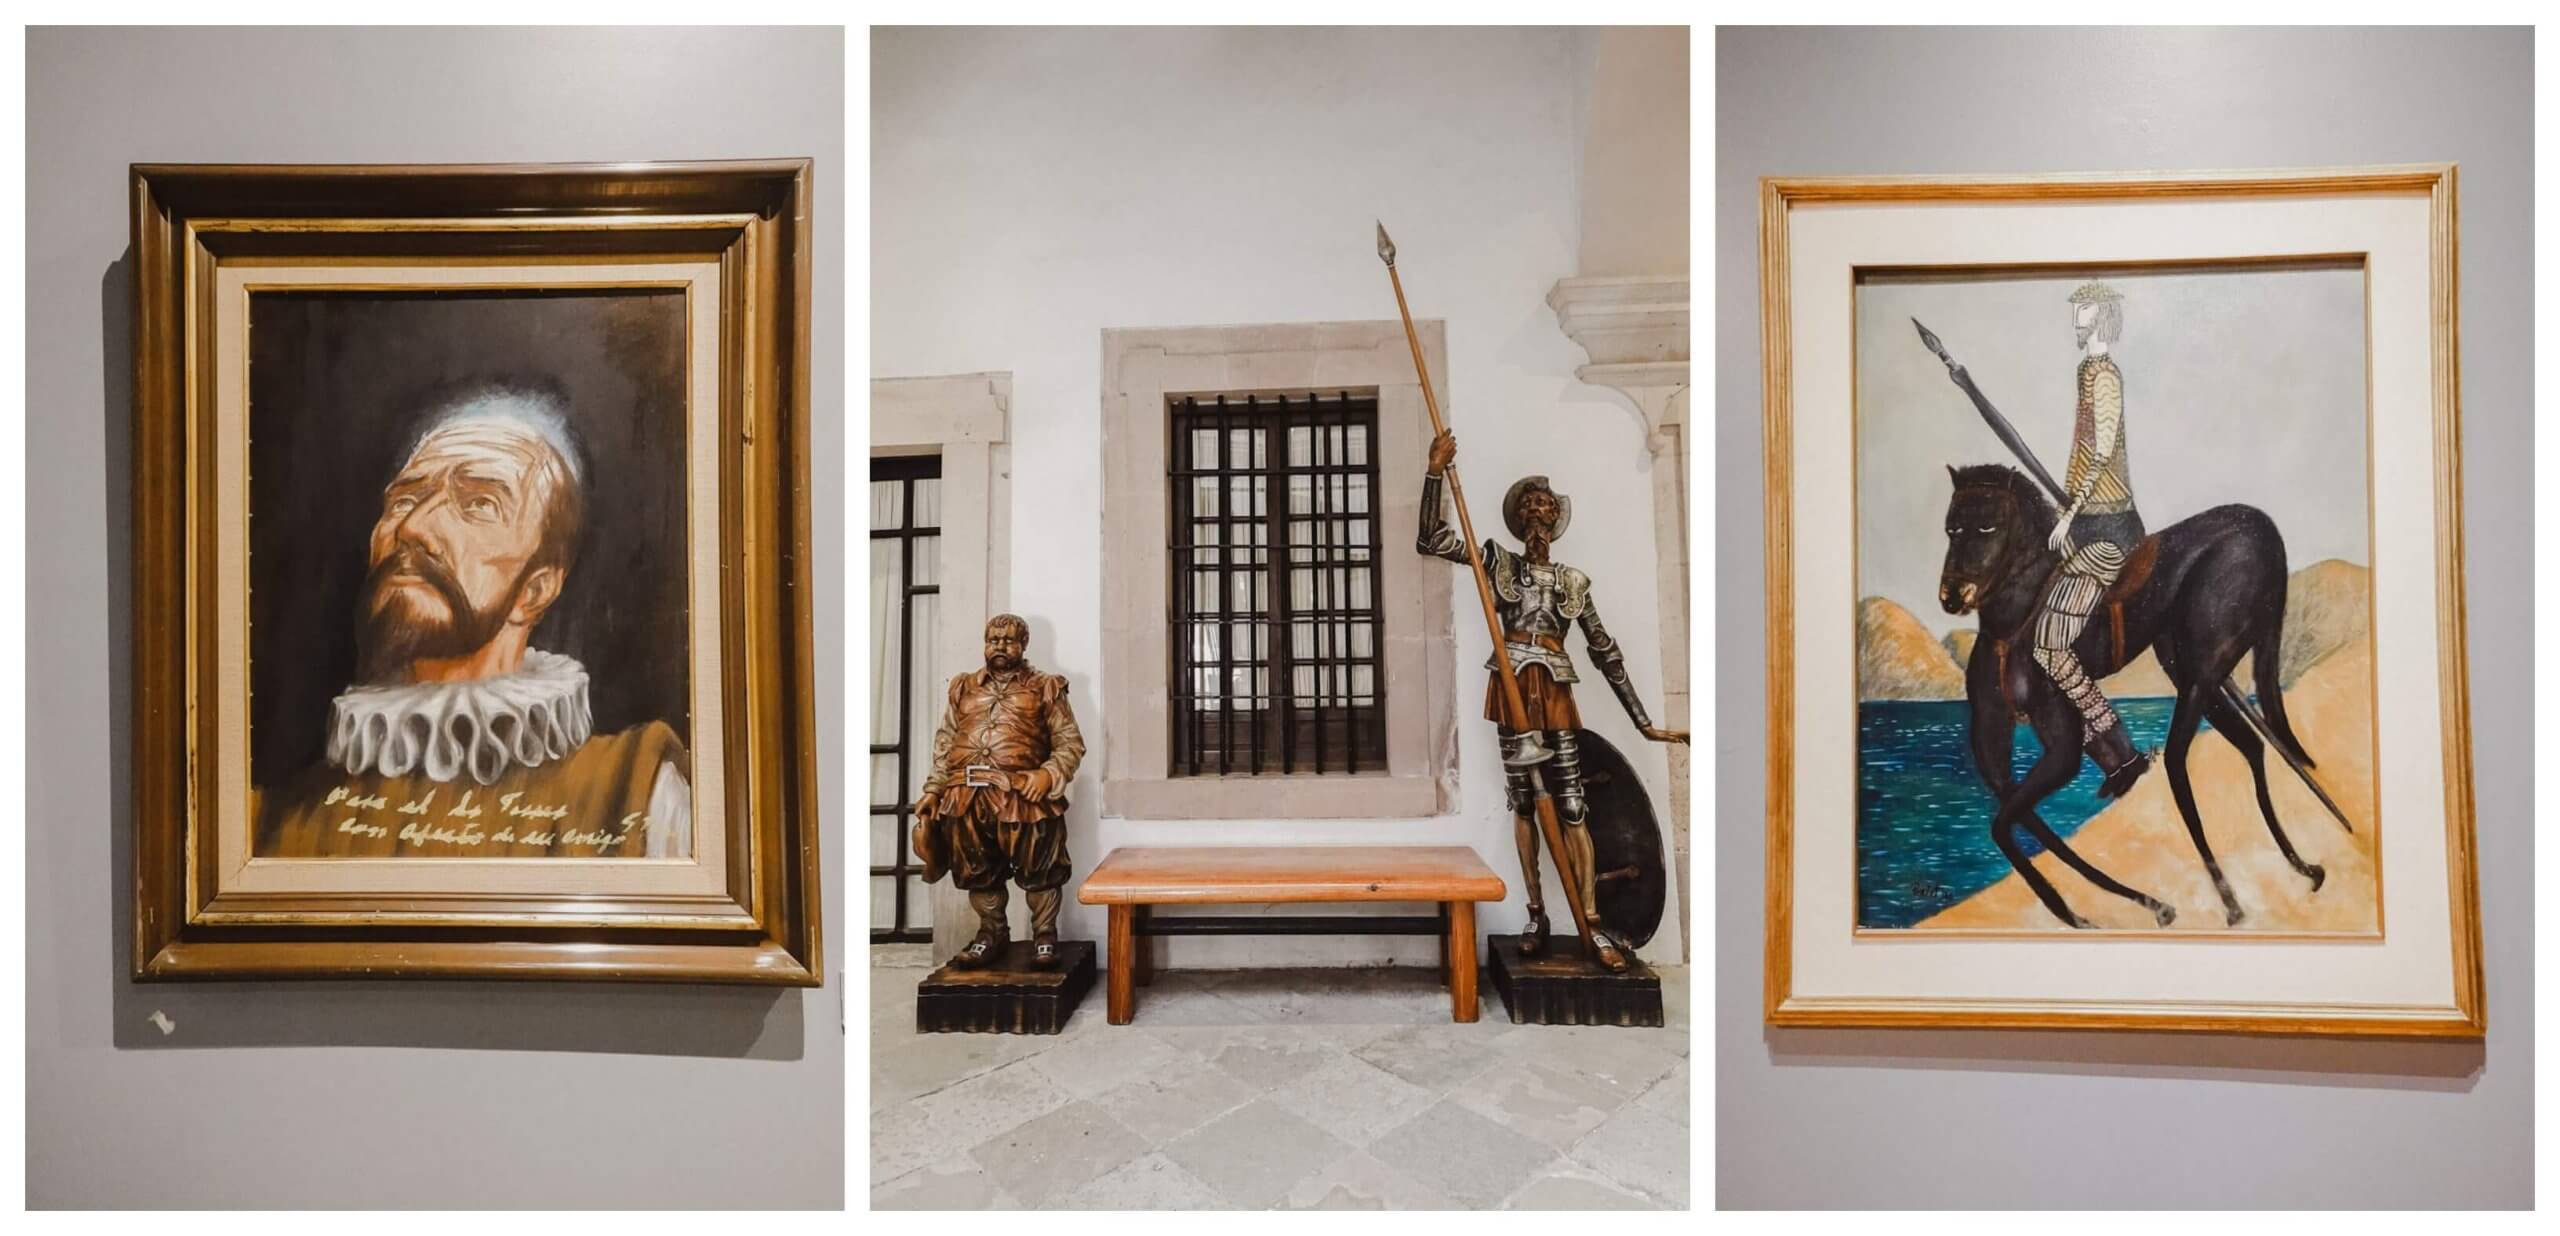 Best things to do in Guanajuato in 24 hours: visit the Don quixote museum 